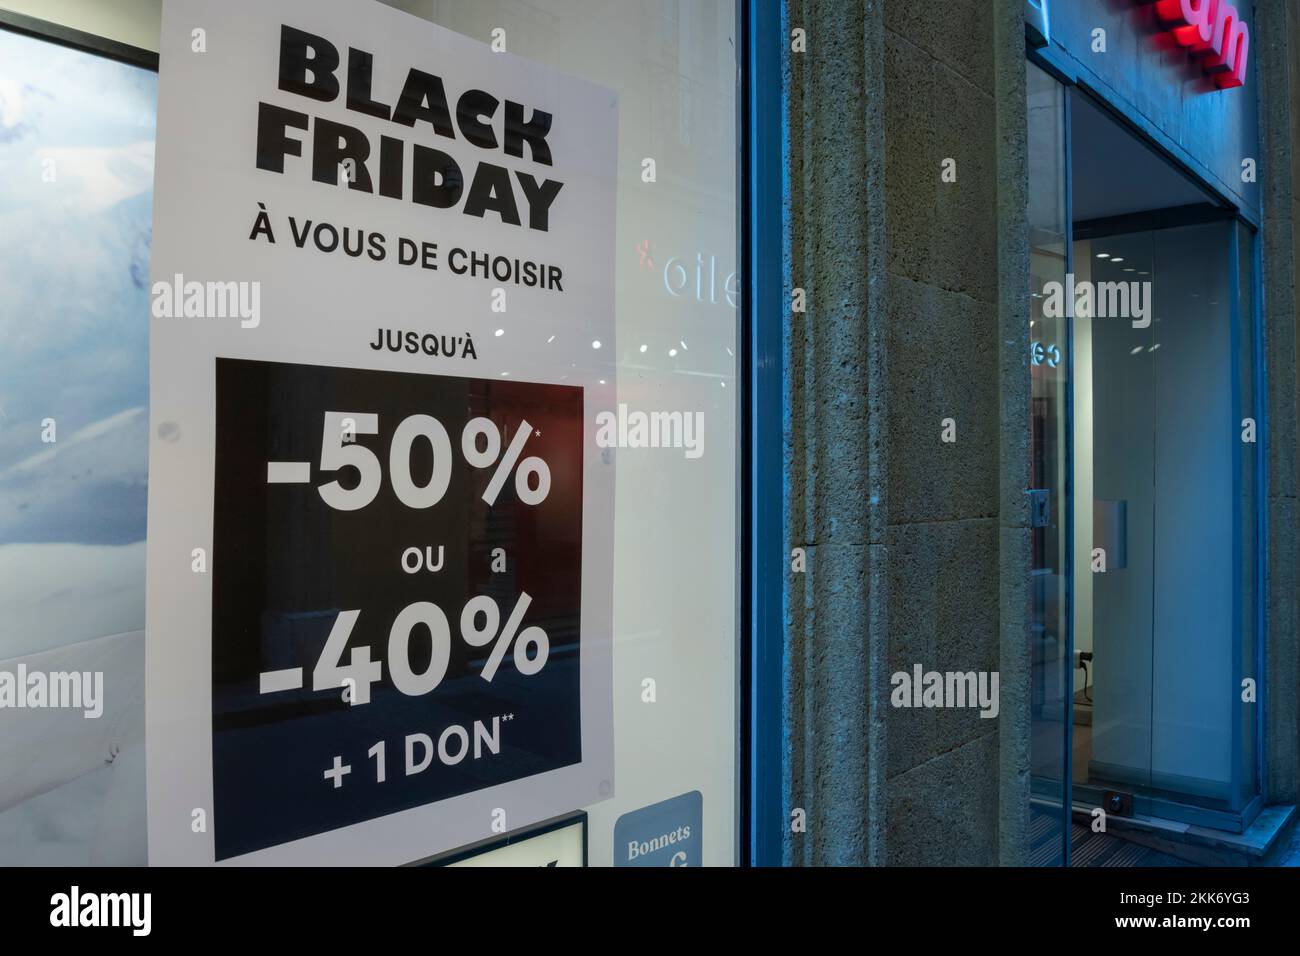 Black Friday promotion at a store in Aix-en-Provence, strong offers at -50 or 40% Stock Photo